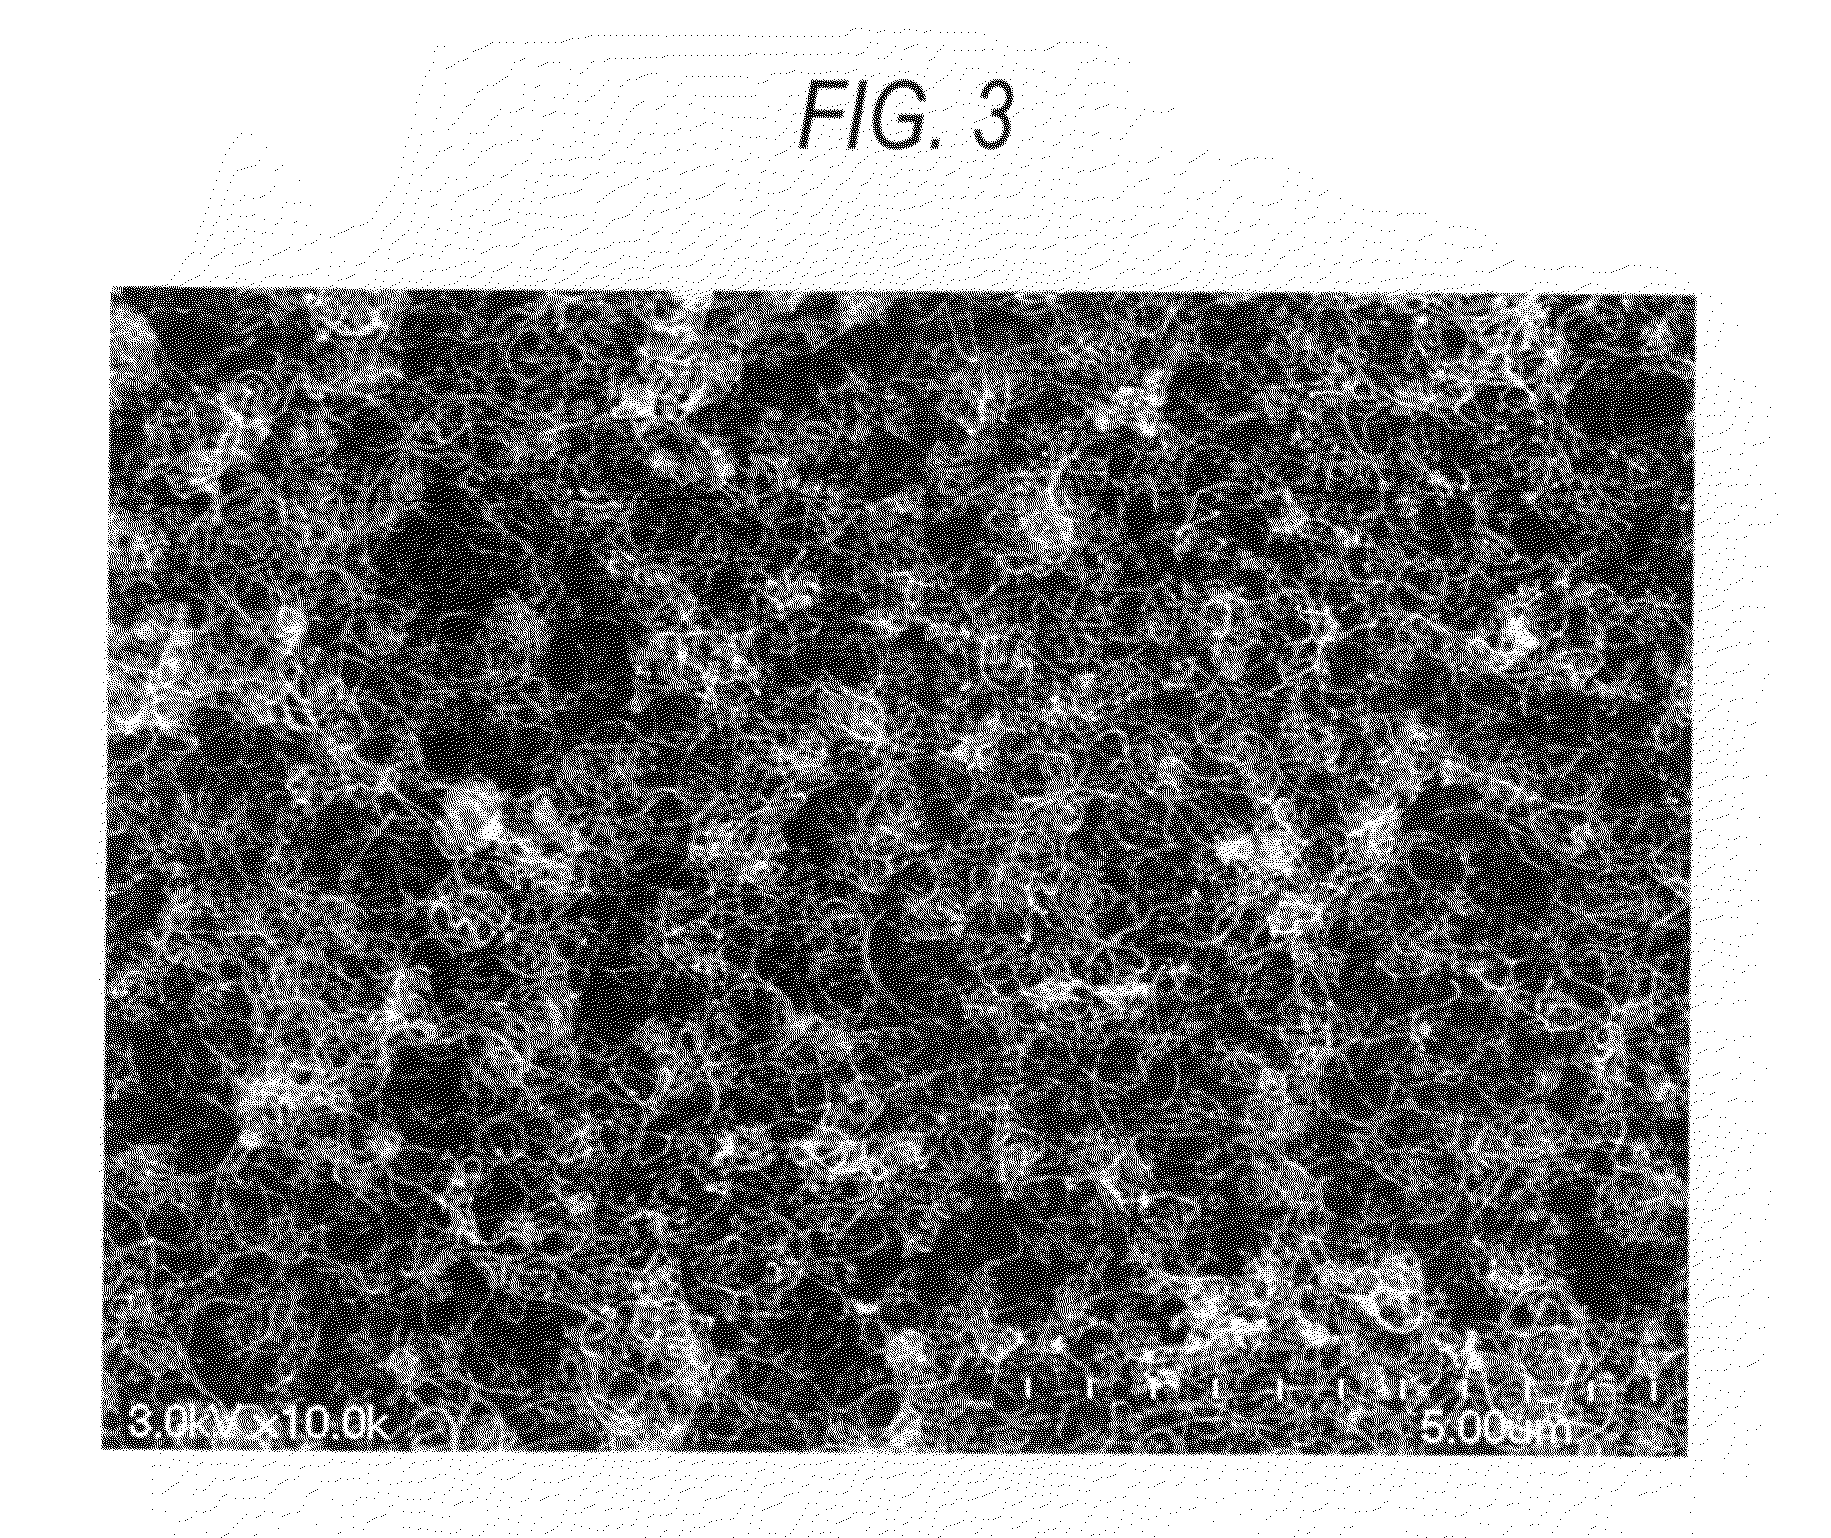 Carbon fiber composite material and process for producing the same